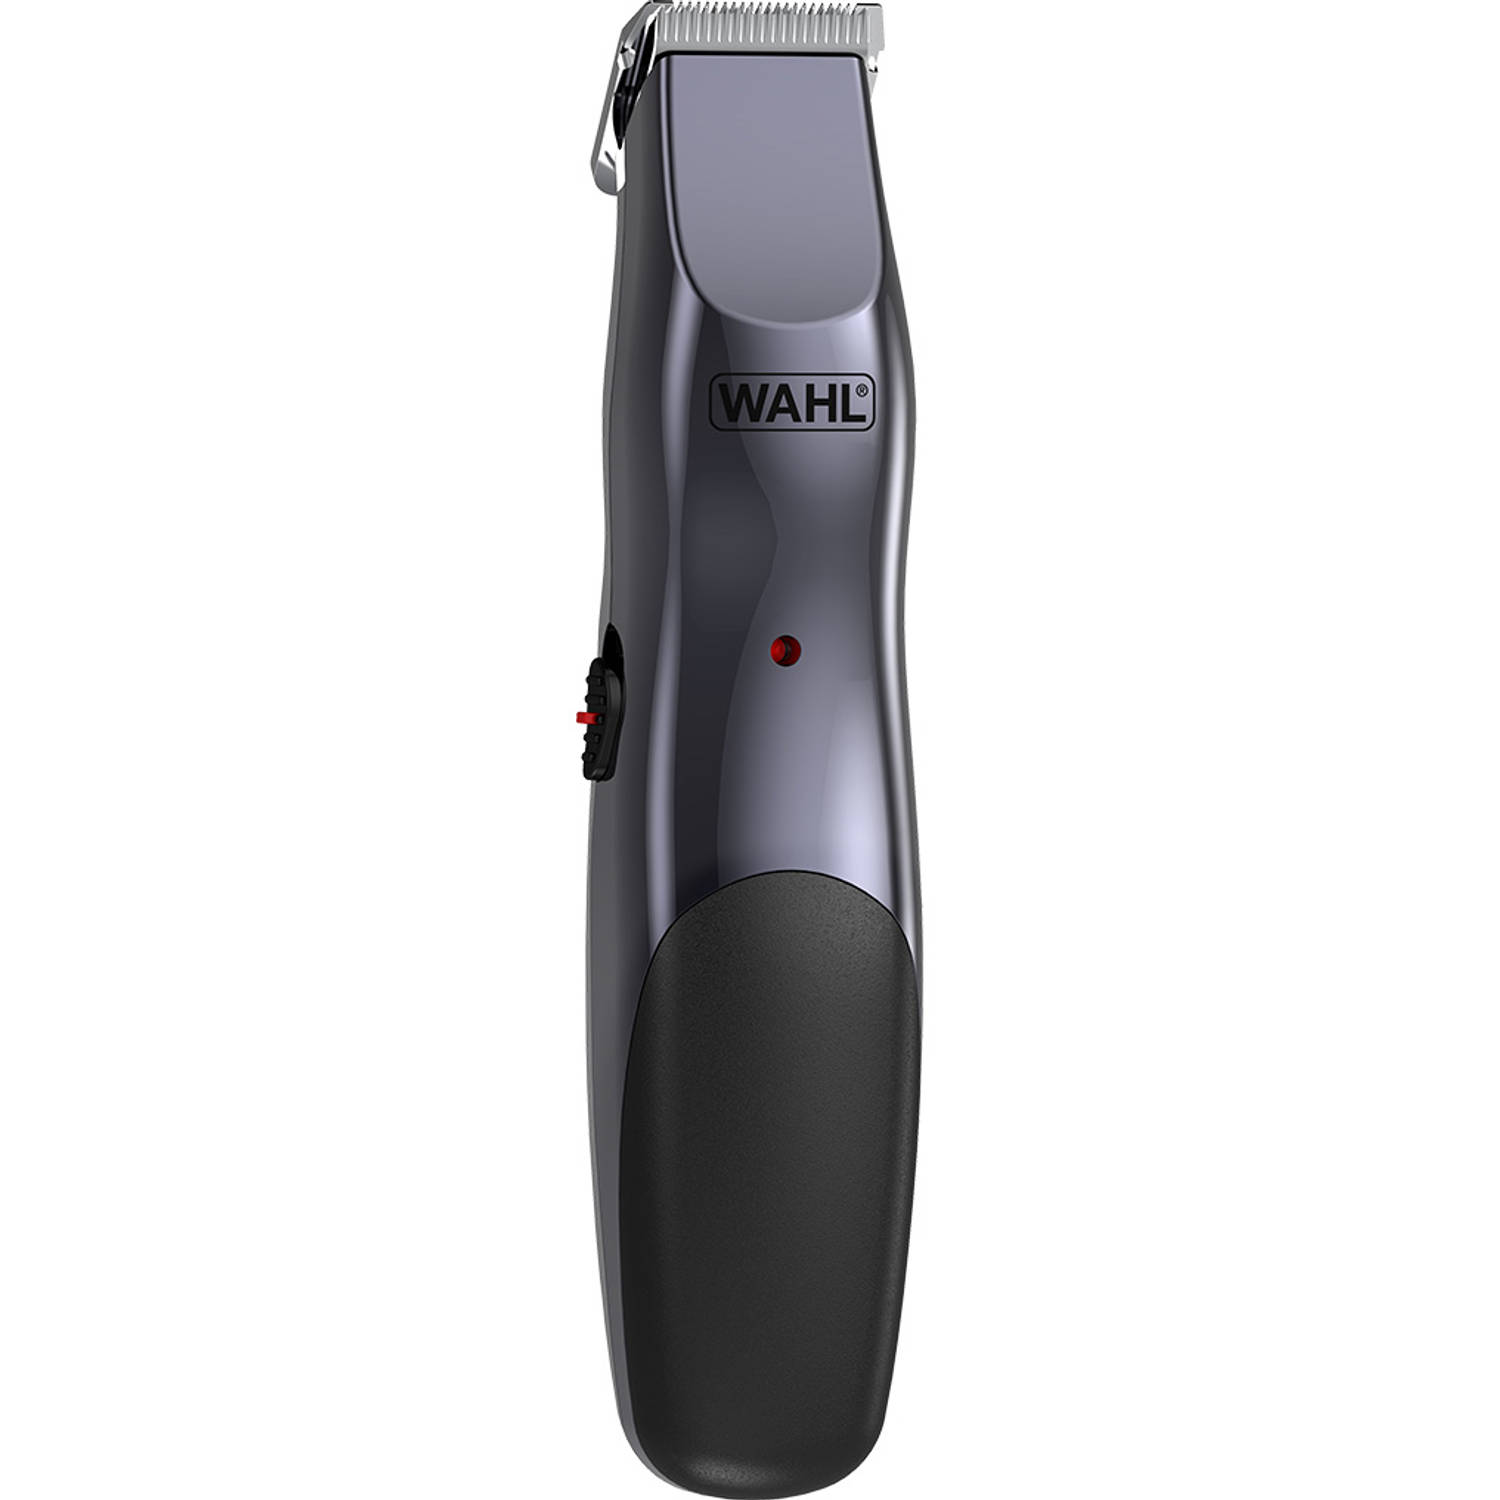 Wahl 9918-1416 Beard and Stubble Baardtrimmer